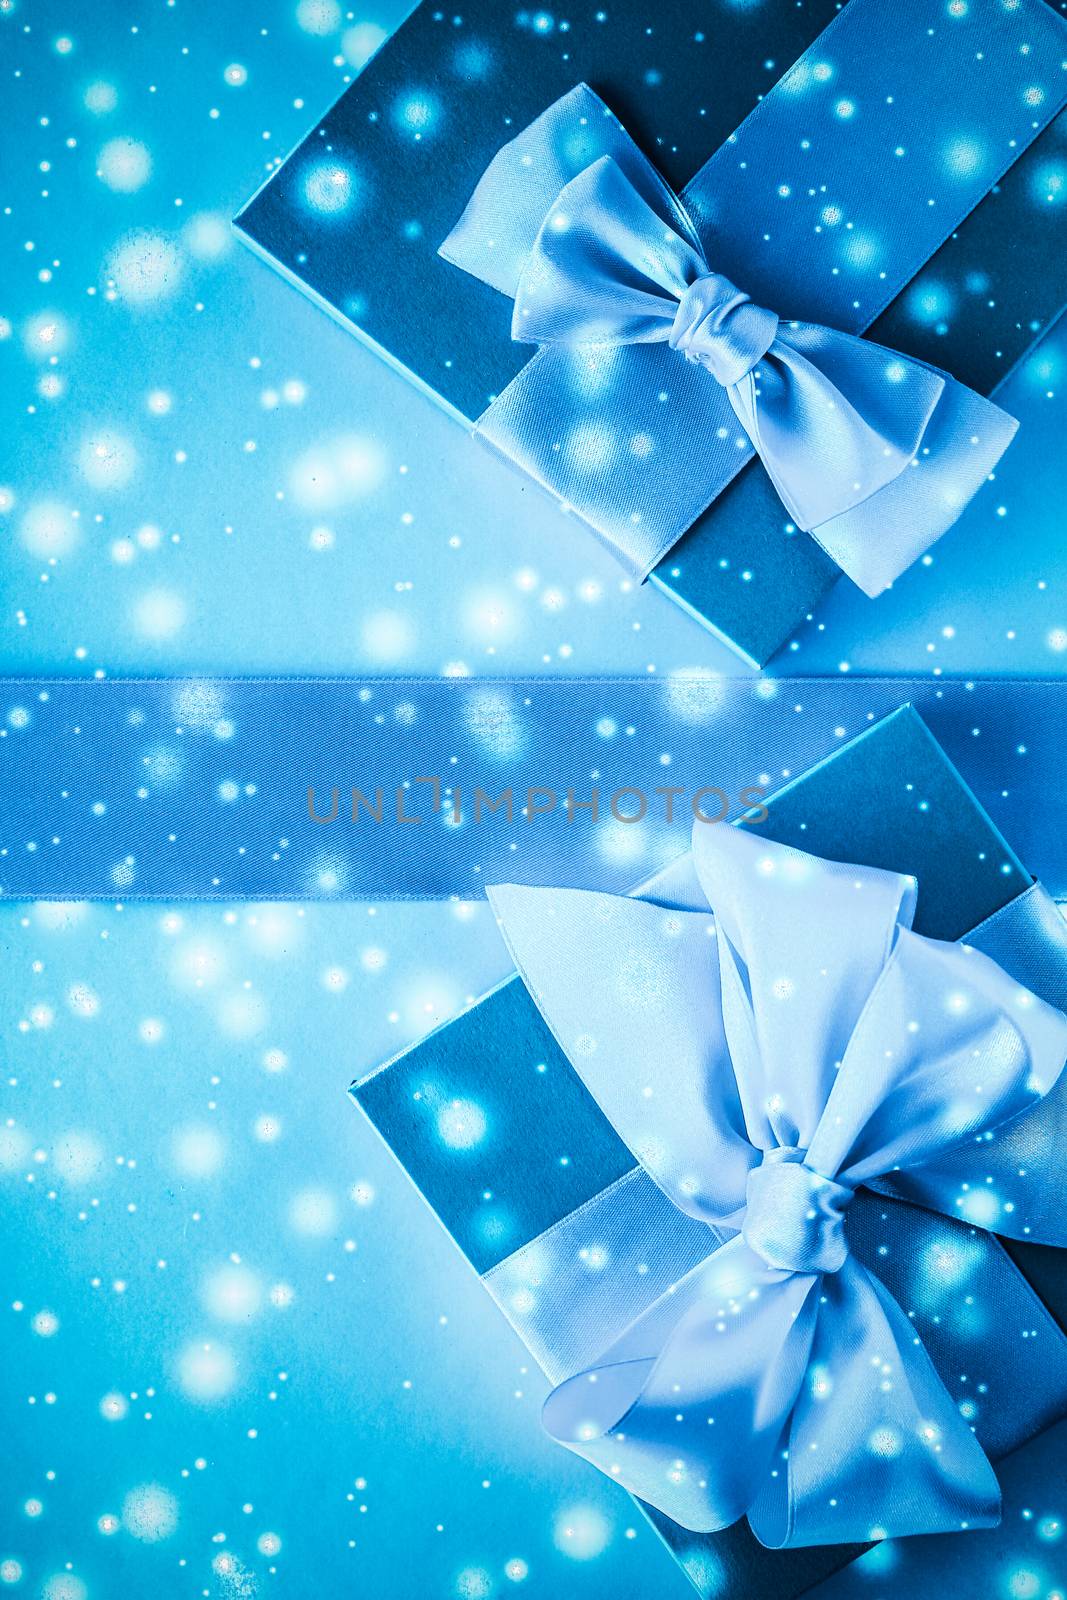 New Years Eve celebration, wrapped luxury boxes and cold season concept - Winter holiday gifts and glowing snow on frozen blue background, Christmas presents surprise